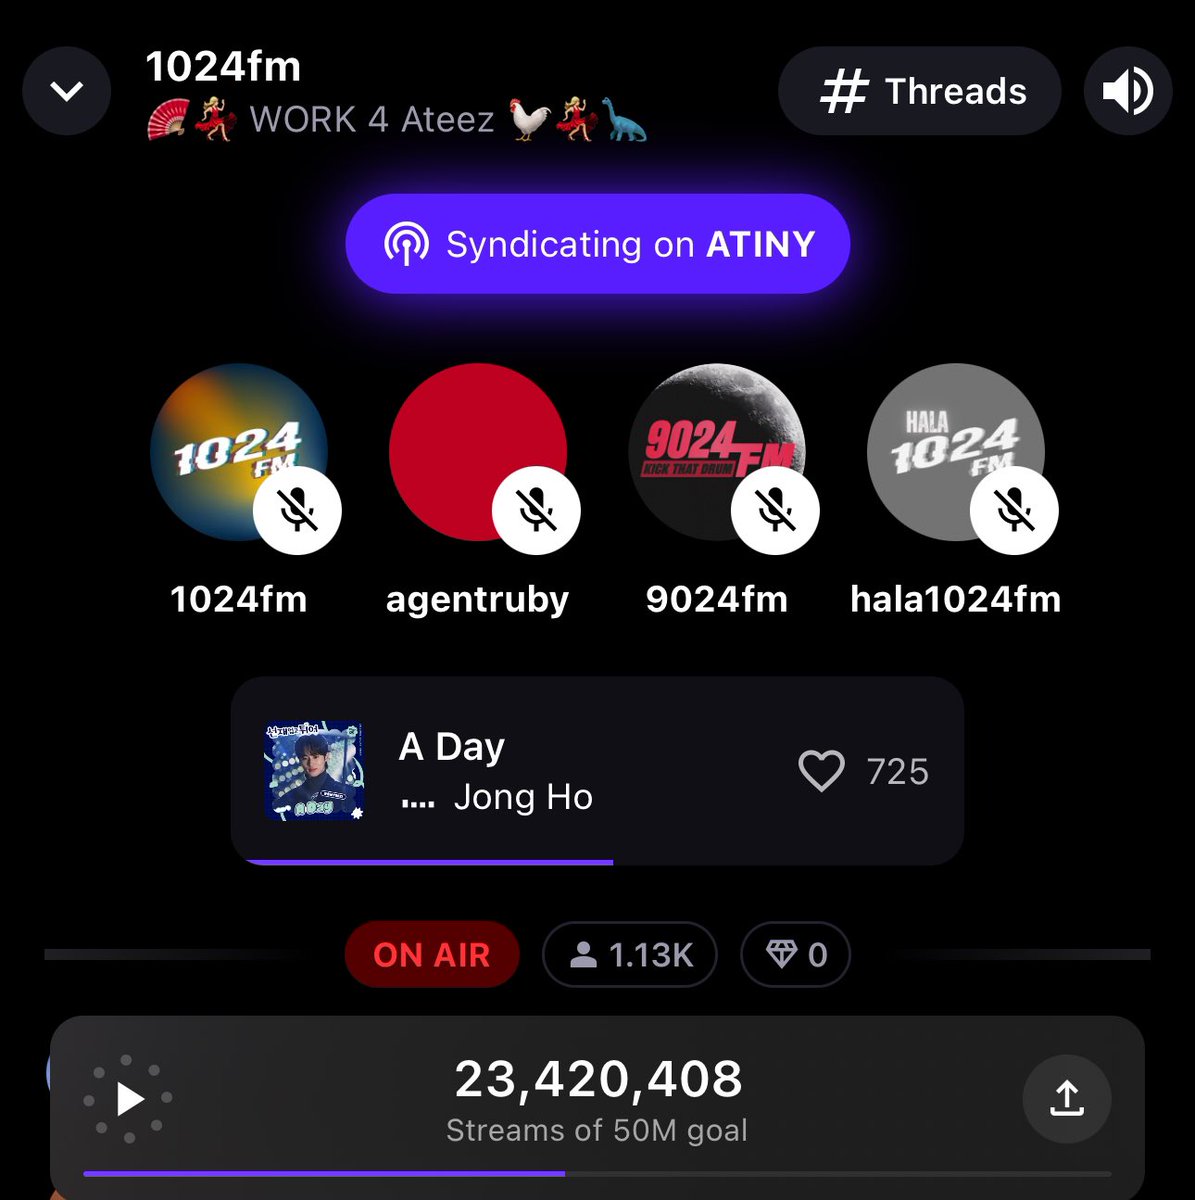 Atinys can we please get the attendance to 2k? Stationhead is one of the easiest ways to effectively stream and get the numbers up! It’s not too much work you can just leave it on ! Please join us 🫶